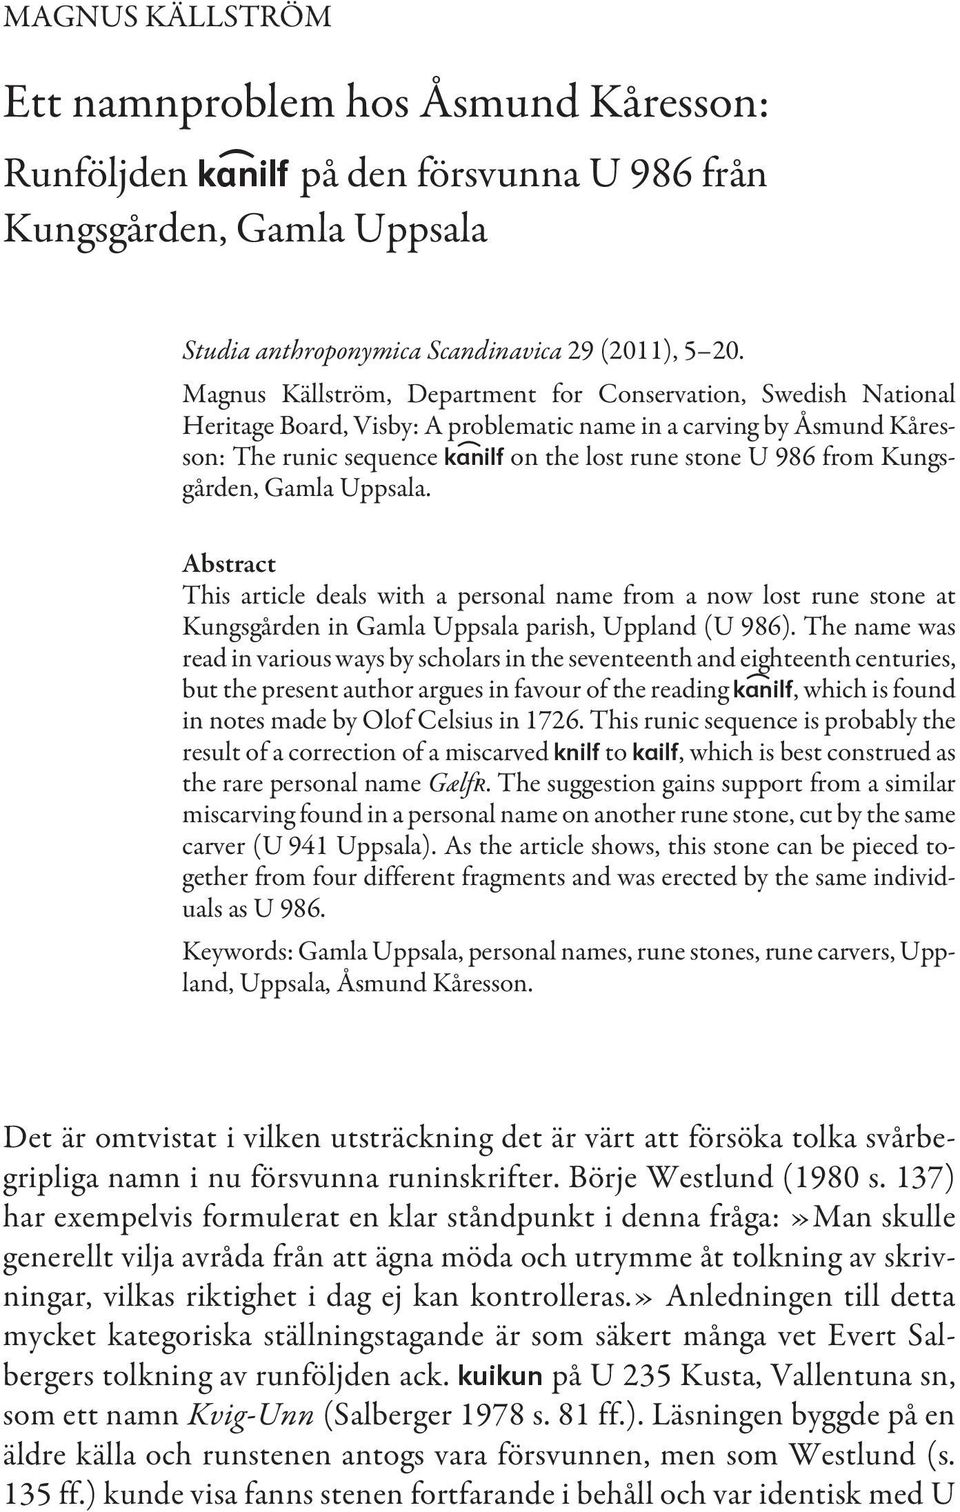 Magnus Källström, Department for Conservation, Swedish National Heritage Board, Visby: A problematic name in a carving by Åsmund Kåresson: The runic sequence k)anilf on the lost rune stone U 986 from